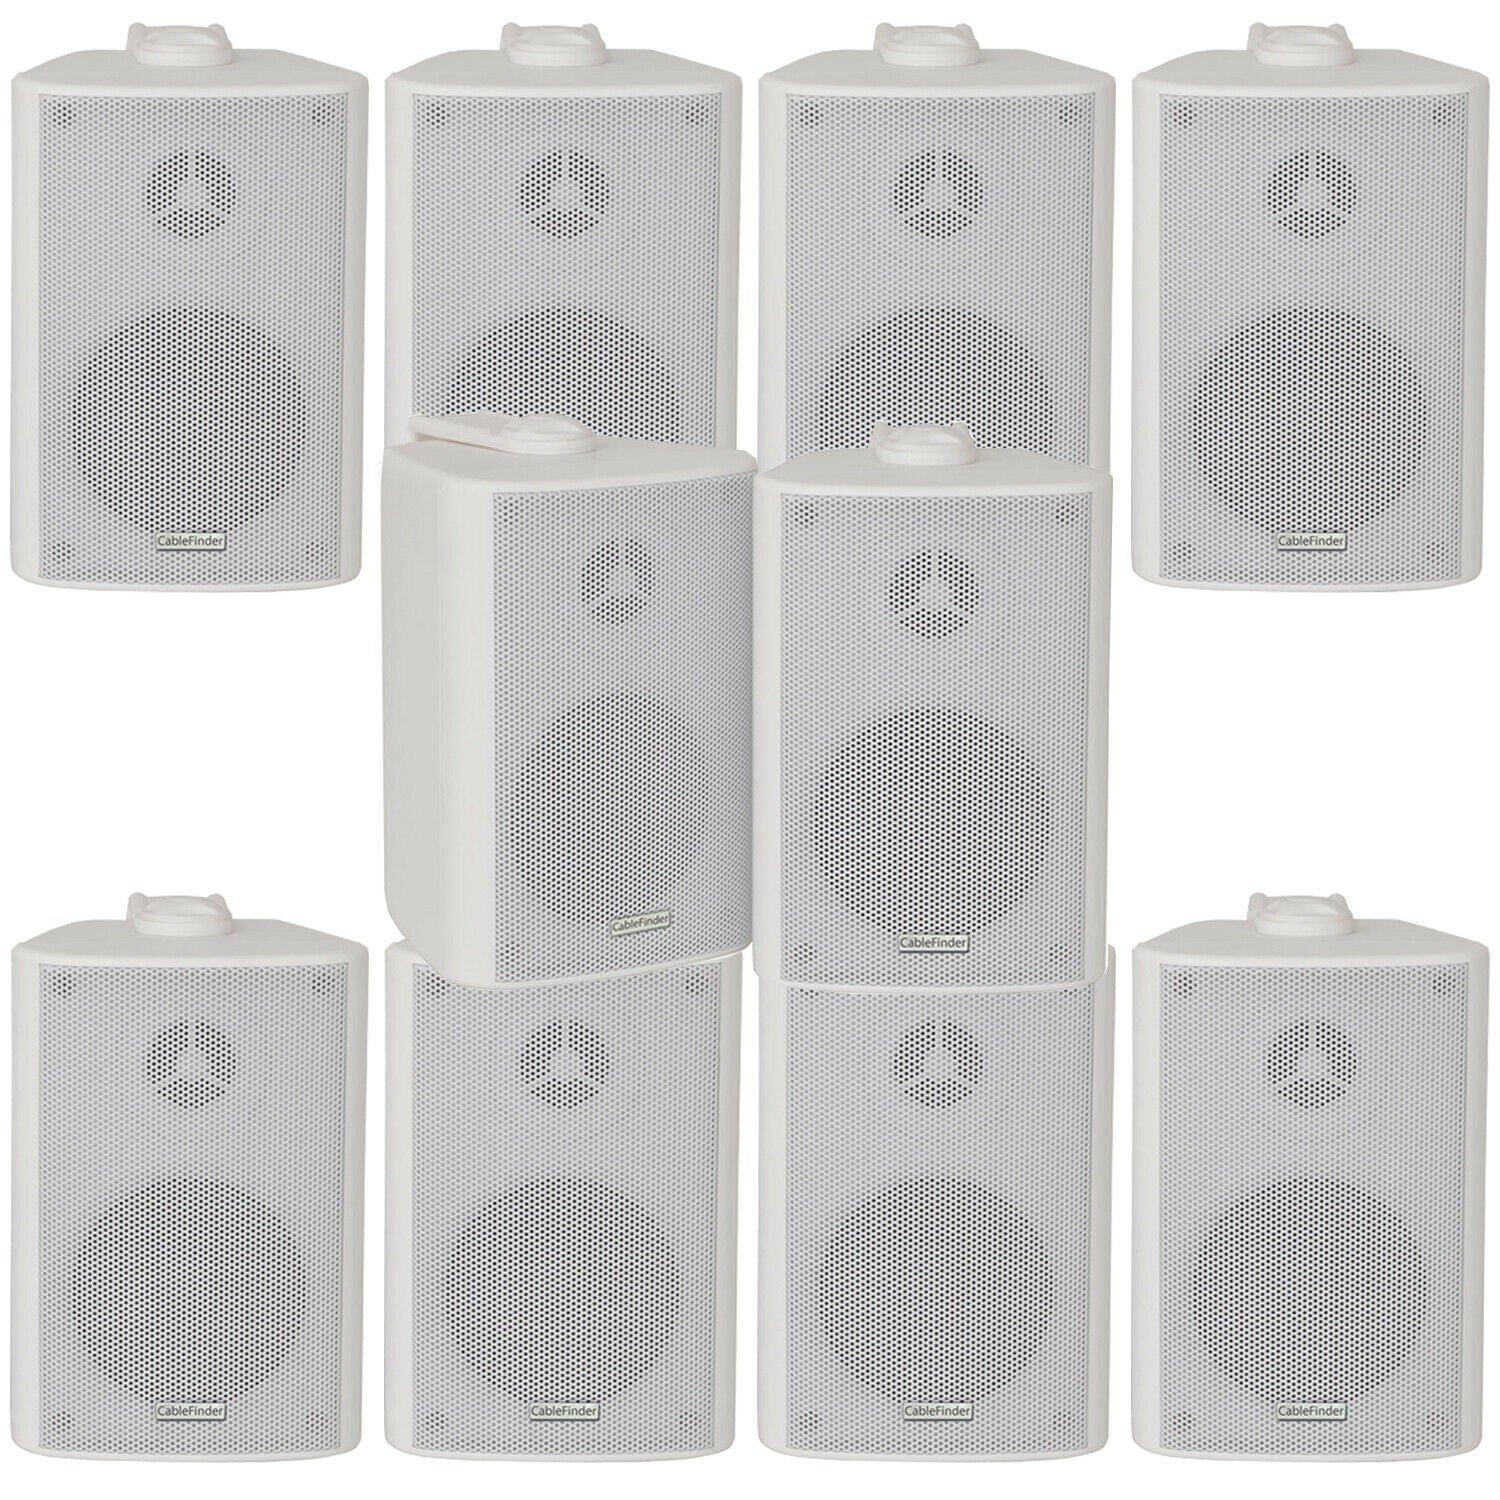 10x 60W 2 Way White Wall Mounted Stereo Speakers 3